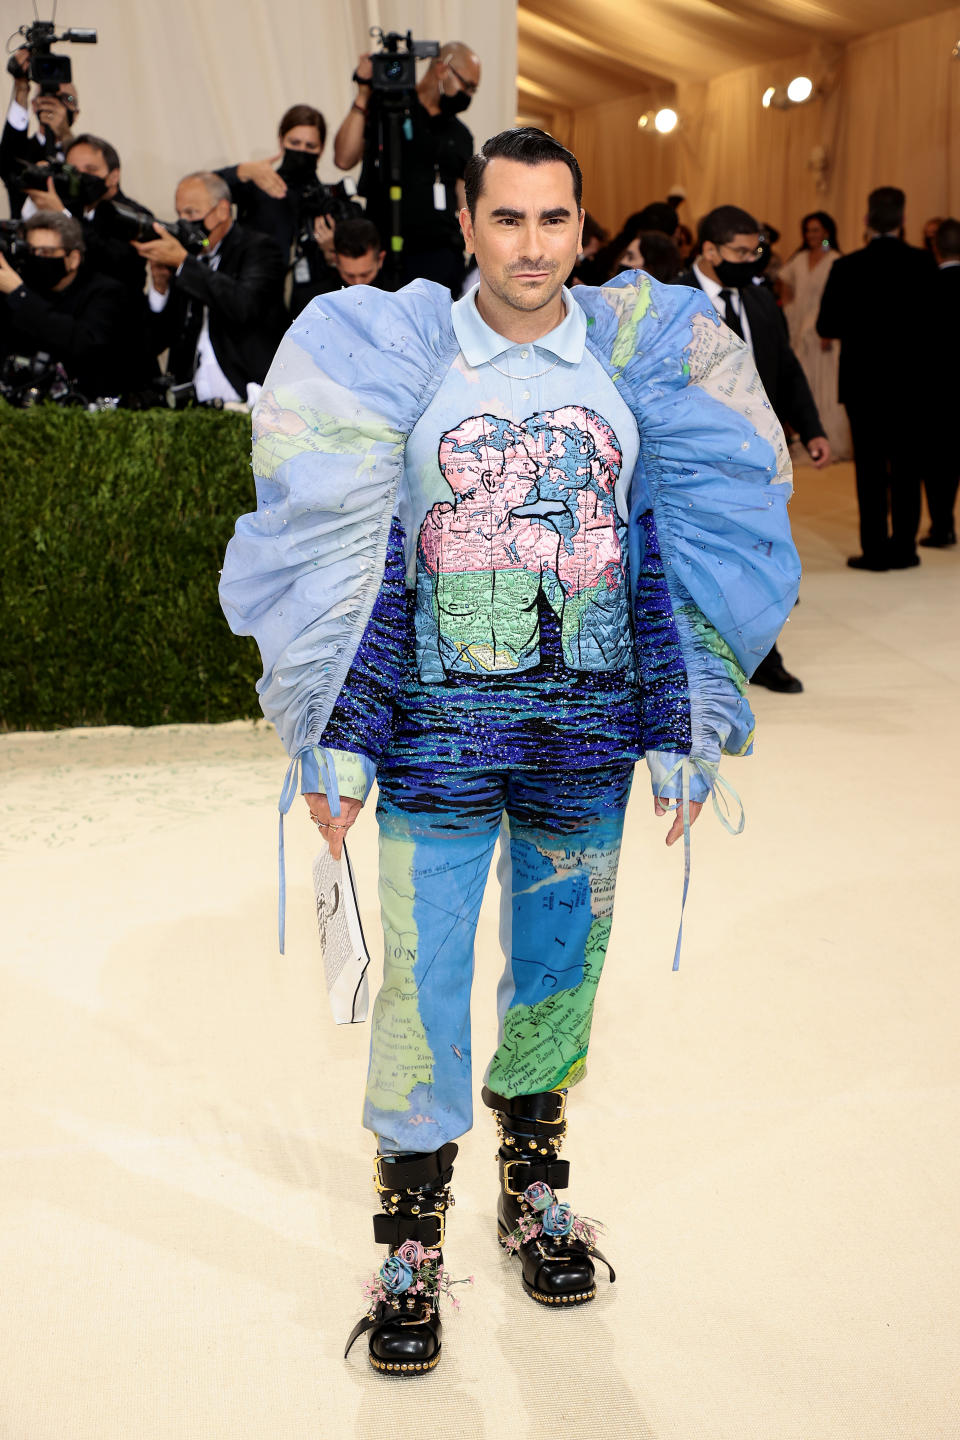 Dan Levy attends The 2021 Met Gala Celebrating In America: A Lexicon Of Fashion at Metropolitan Museum of Art on September 13, 2021 in New York City. (Getty Images)